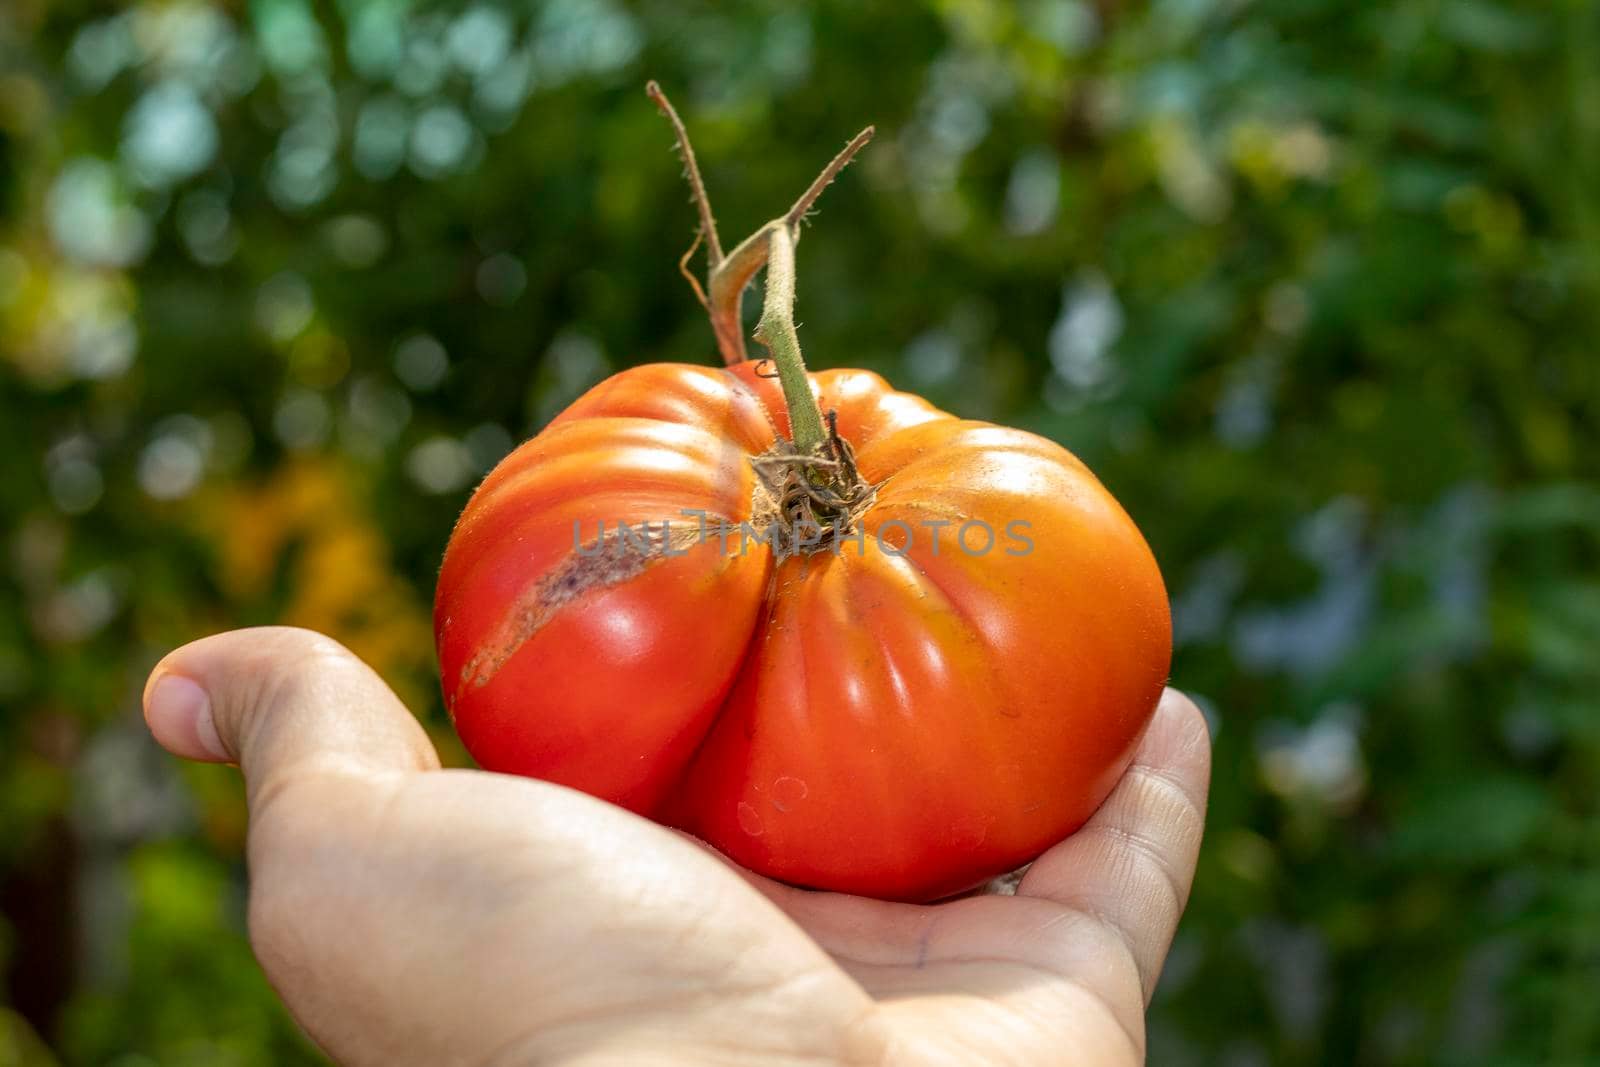 A beautiful tomato picked from the garden ready to be cooked by bybyphotography